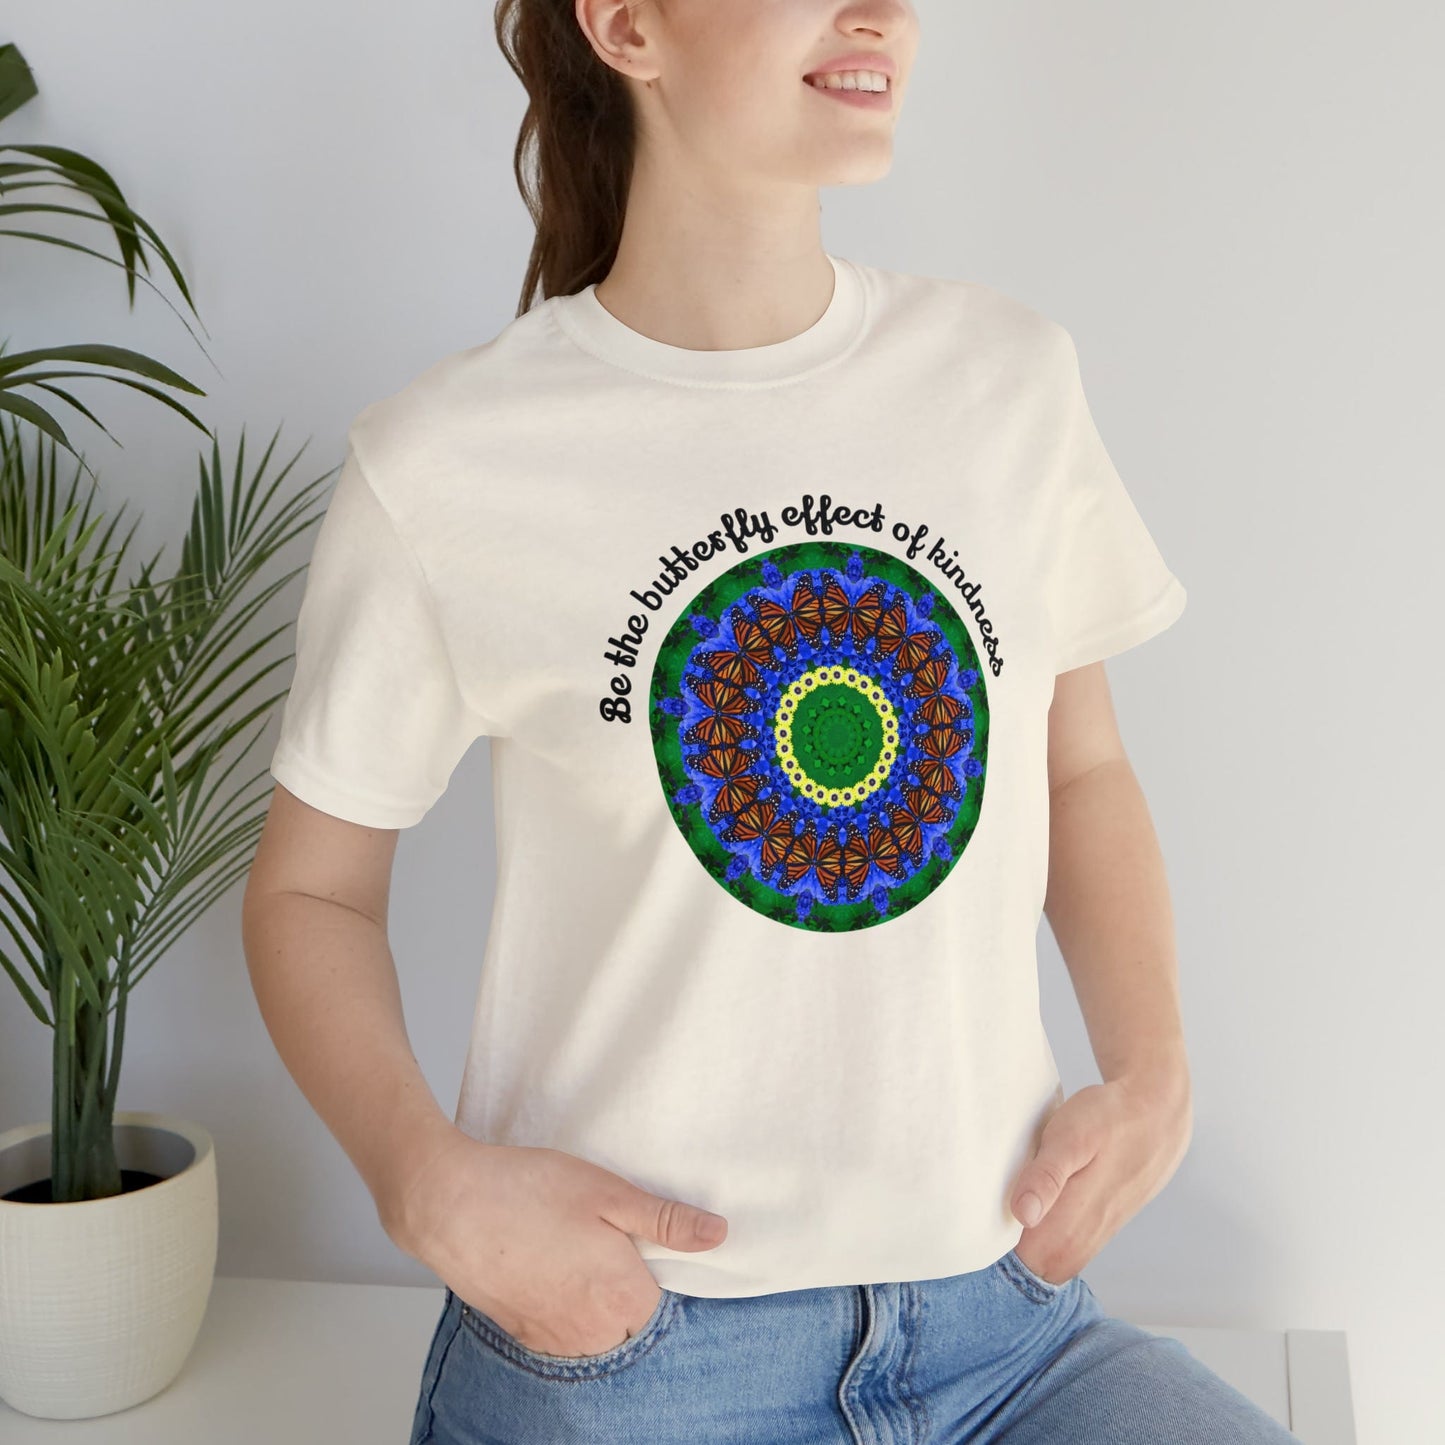 Cute Graphic Kindness Shirts  - Beautiful Monarch Butterfly Mandala Art For Positive Vibes – Butterfly Effect Natural